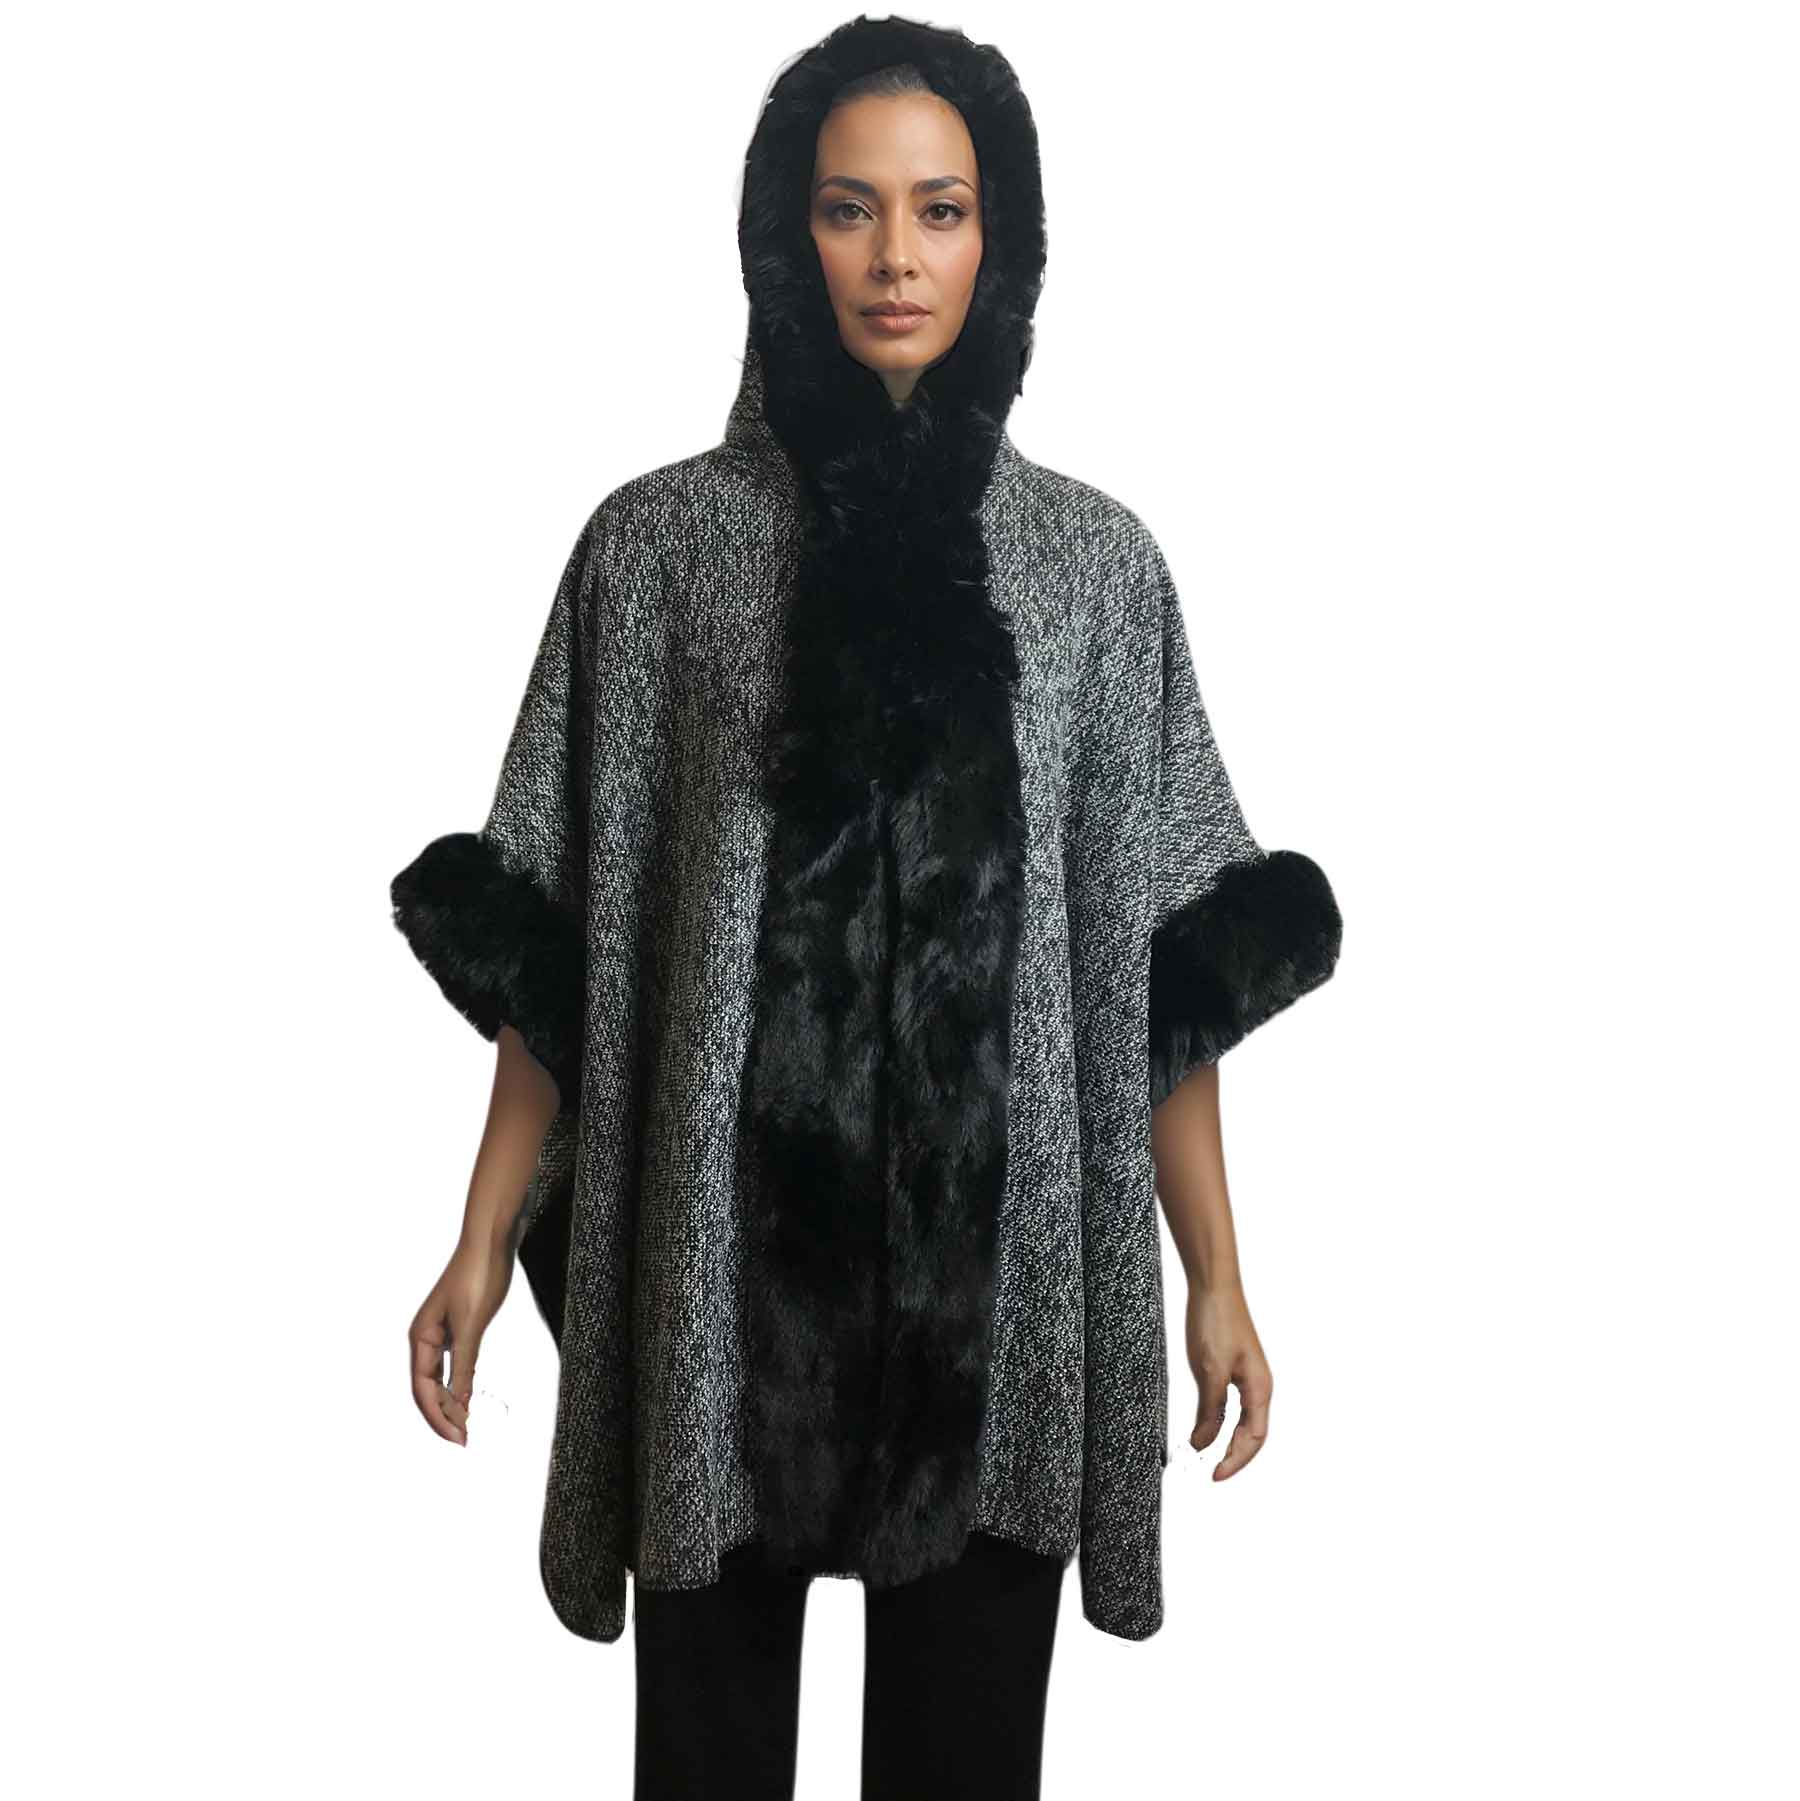 LC17 - Black/Silver<br>
Hooded Fur Trimmed Cape